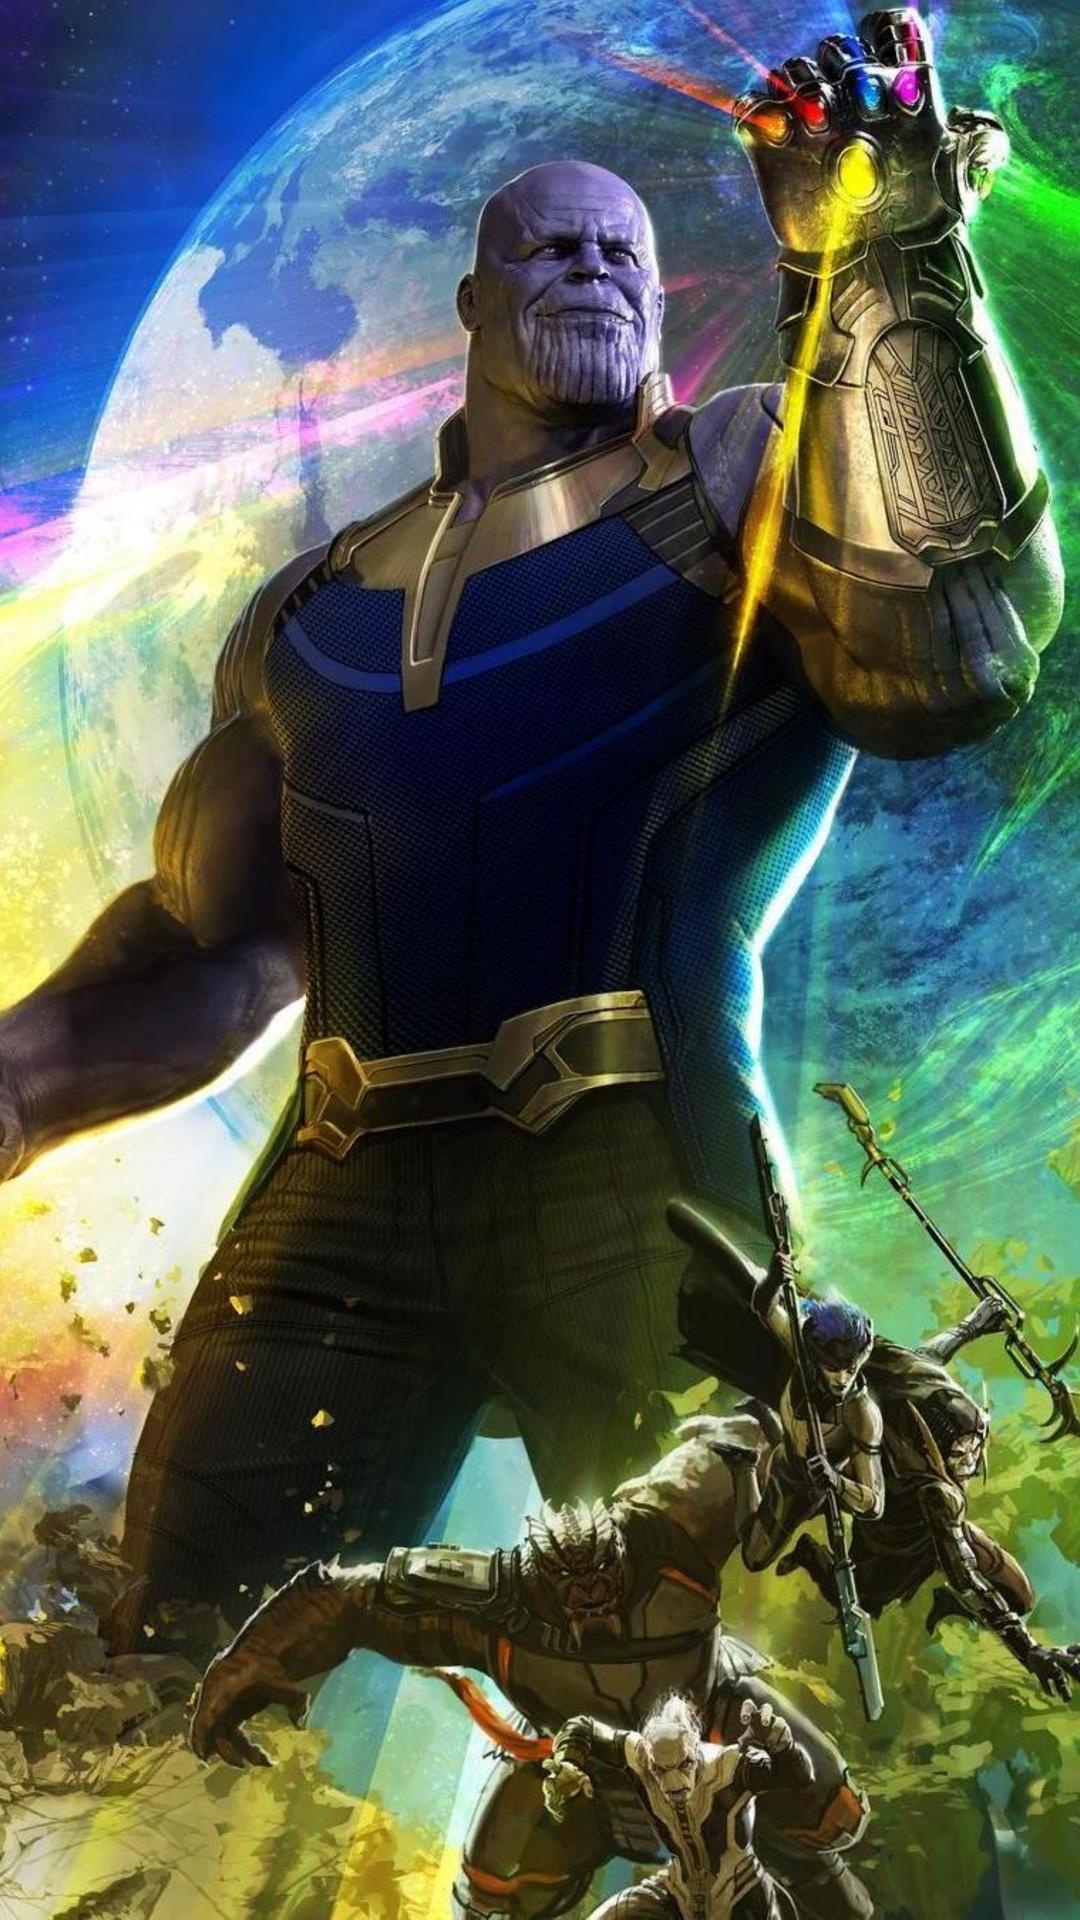 Phone wallpapers, Top free, Thanos backgrounds, 1080x1920 Full HD Handy